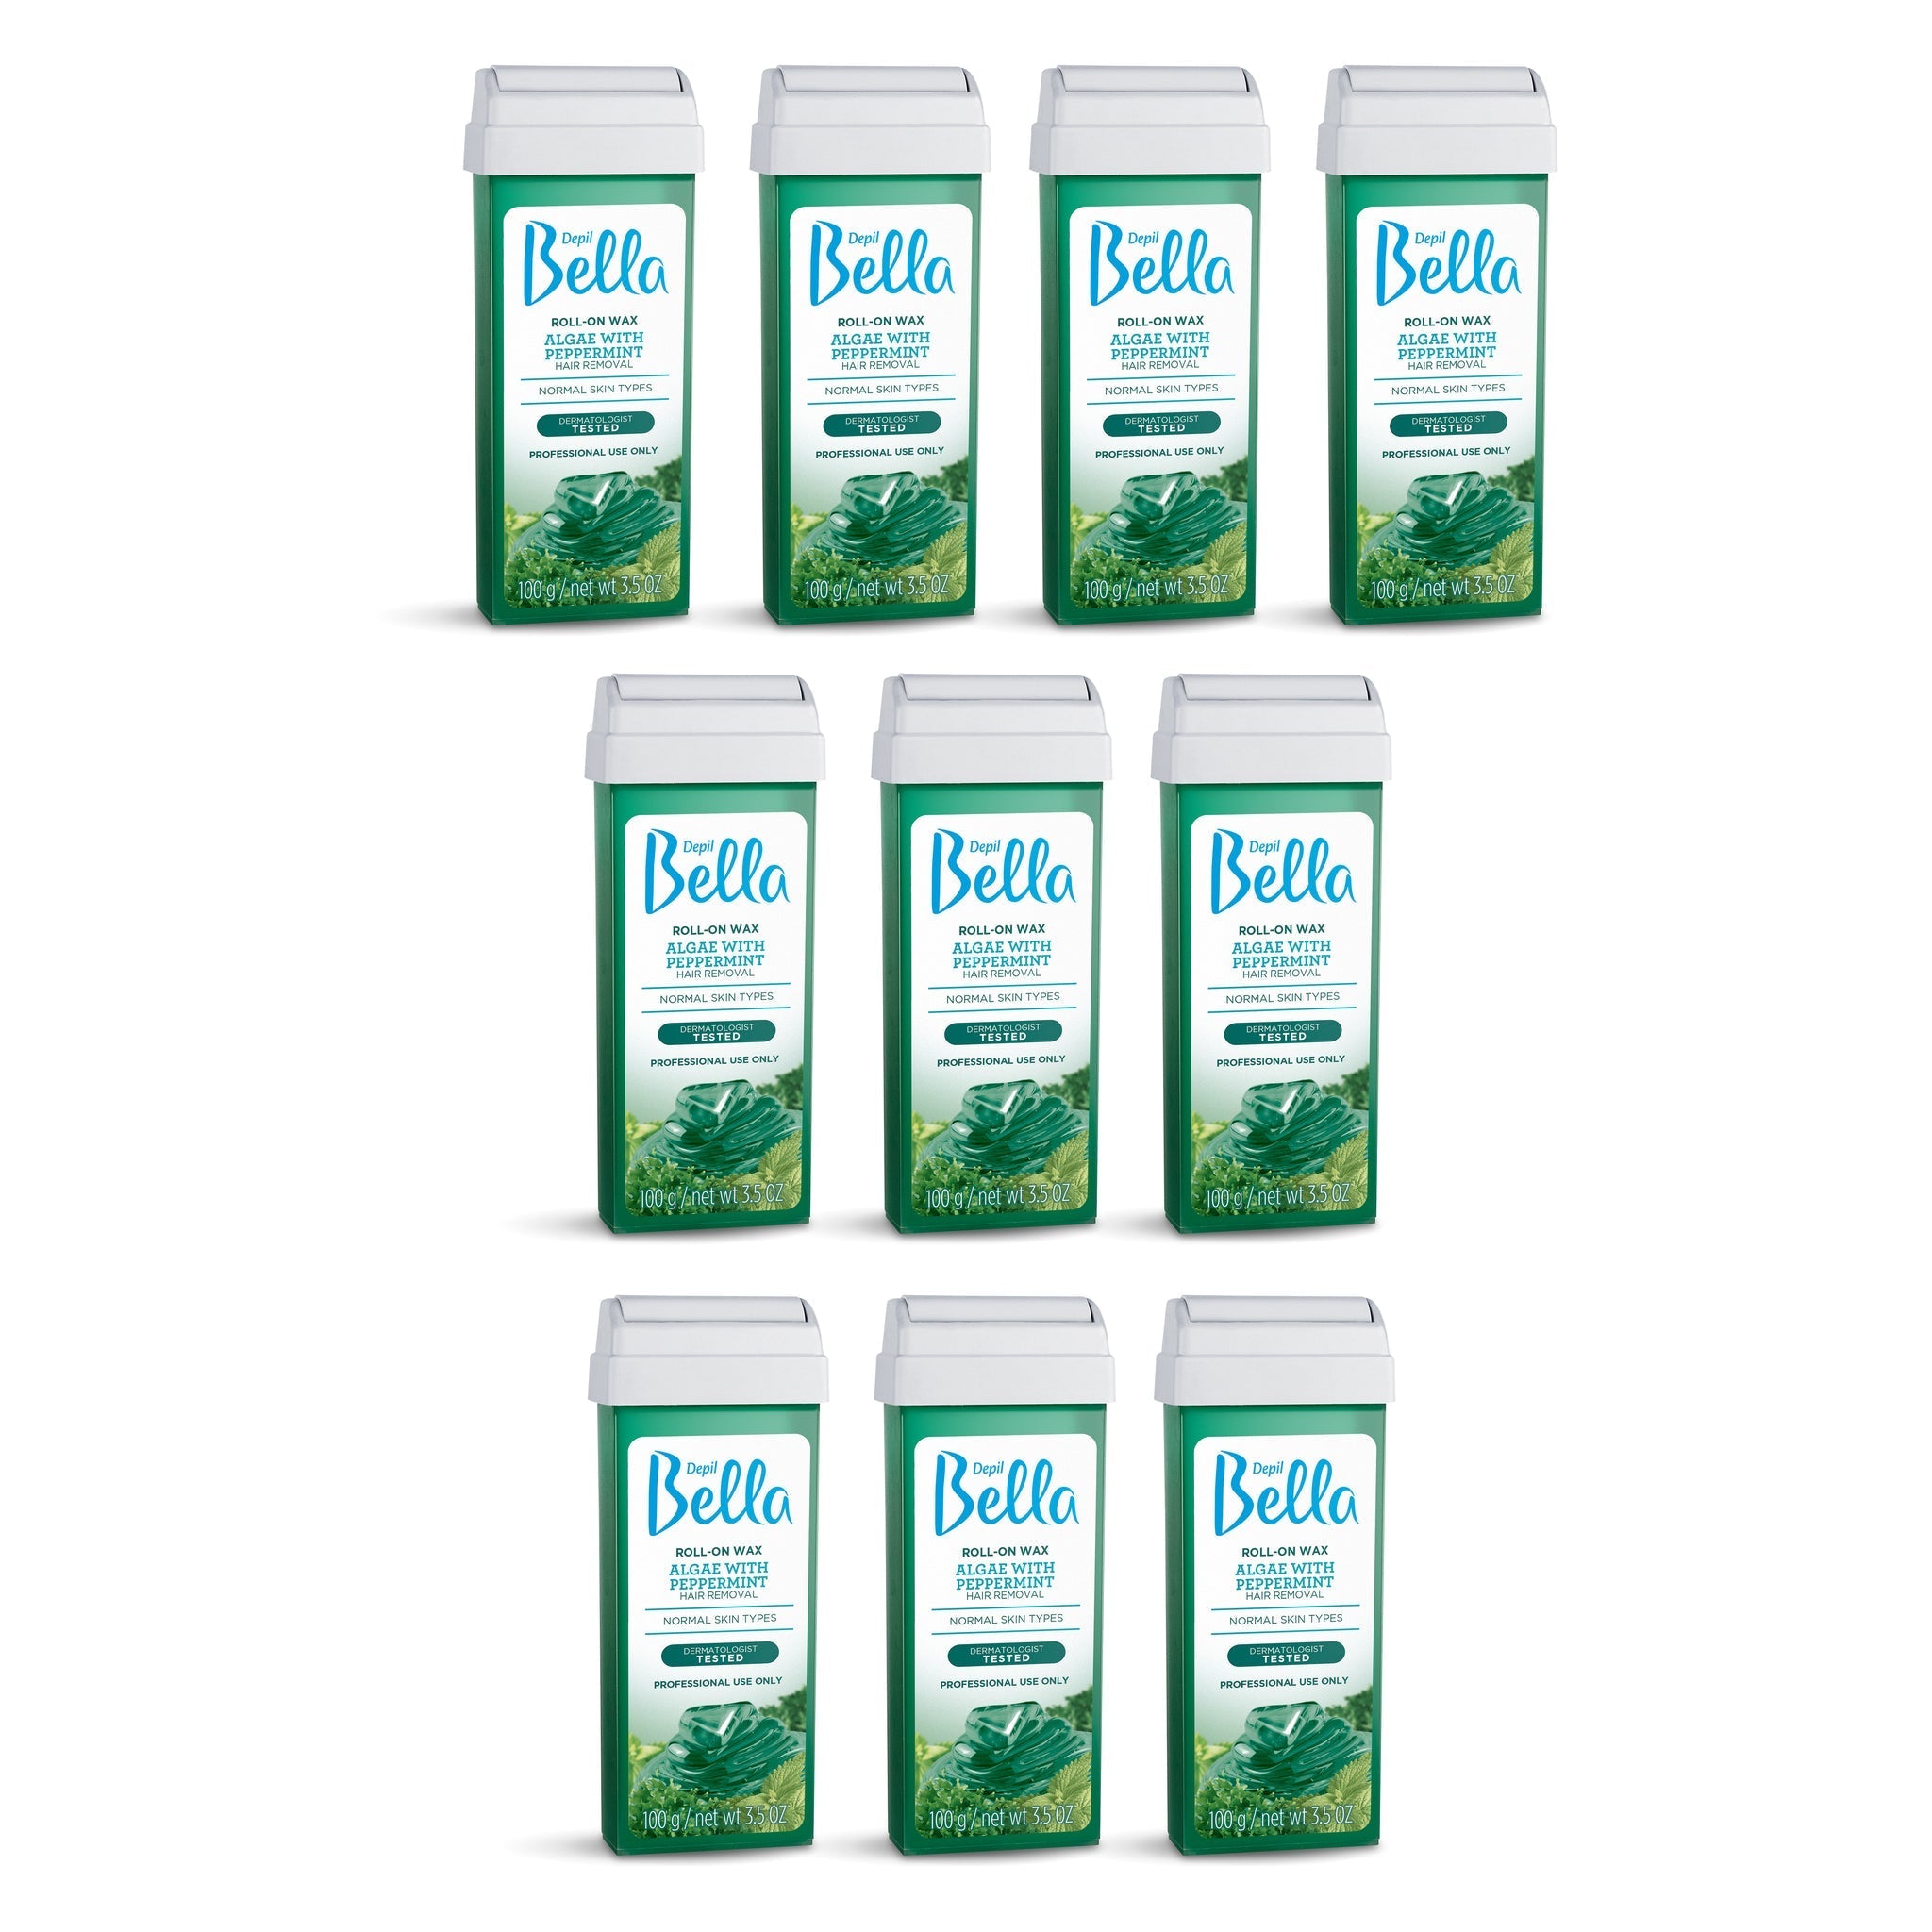 Depil Bella Hair Removal Wax Depil Bella Roll-On Algae with Peppermint Wax Hair Removal Cartridges 3.52Oz (10 Units )